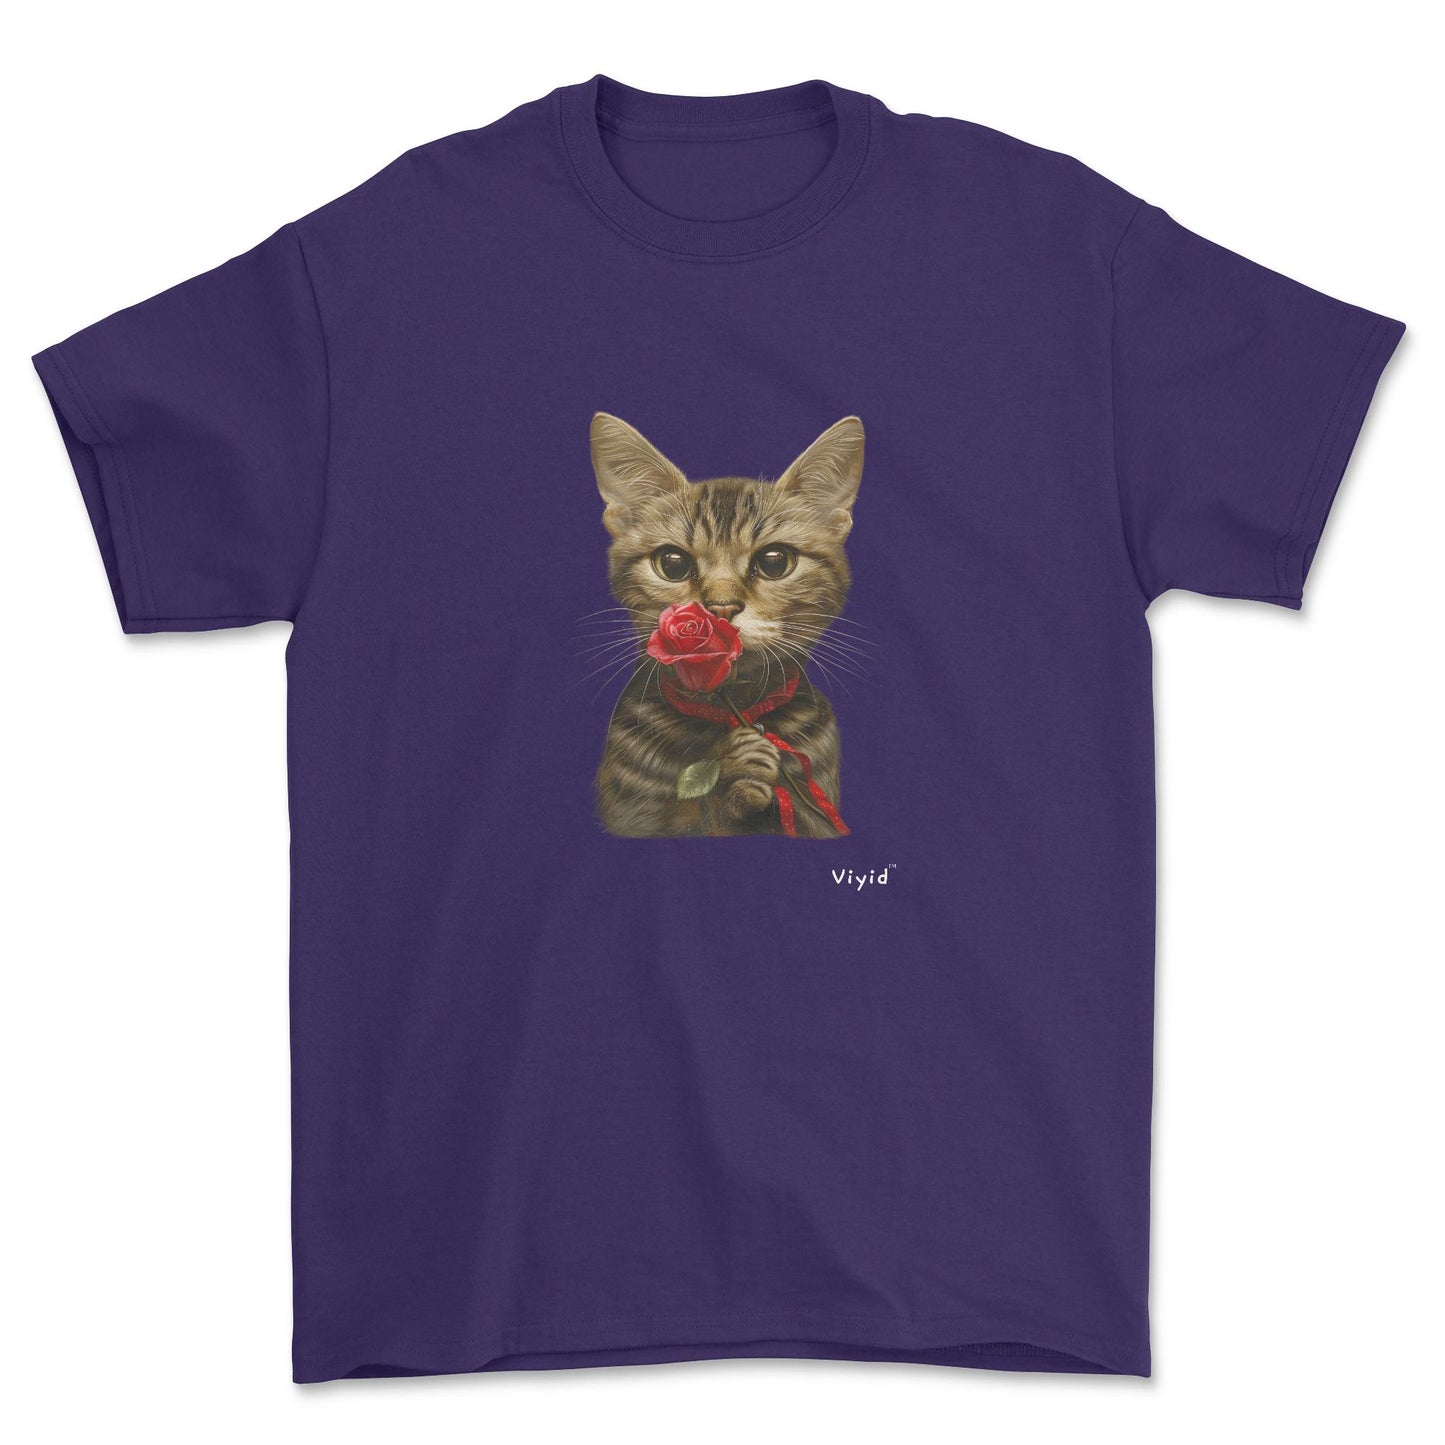 sniffing rose domestic shorthair cat youth t-shirt purple